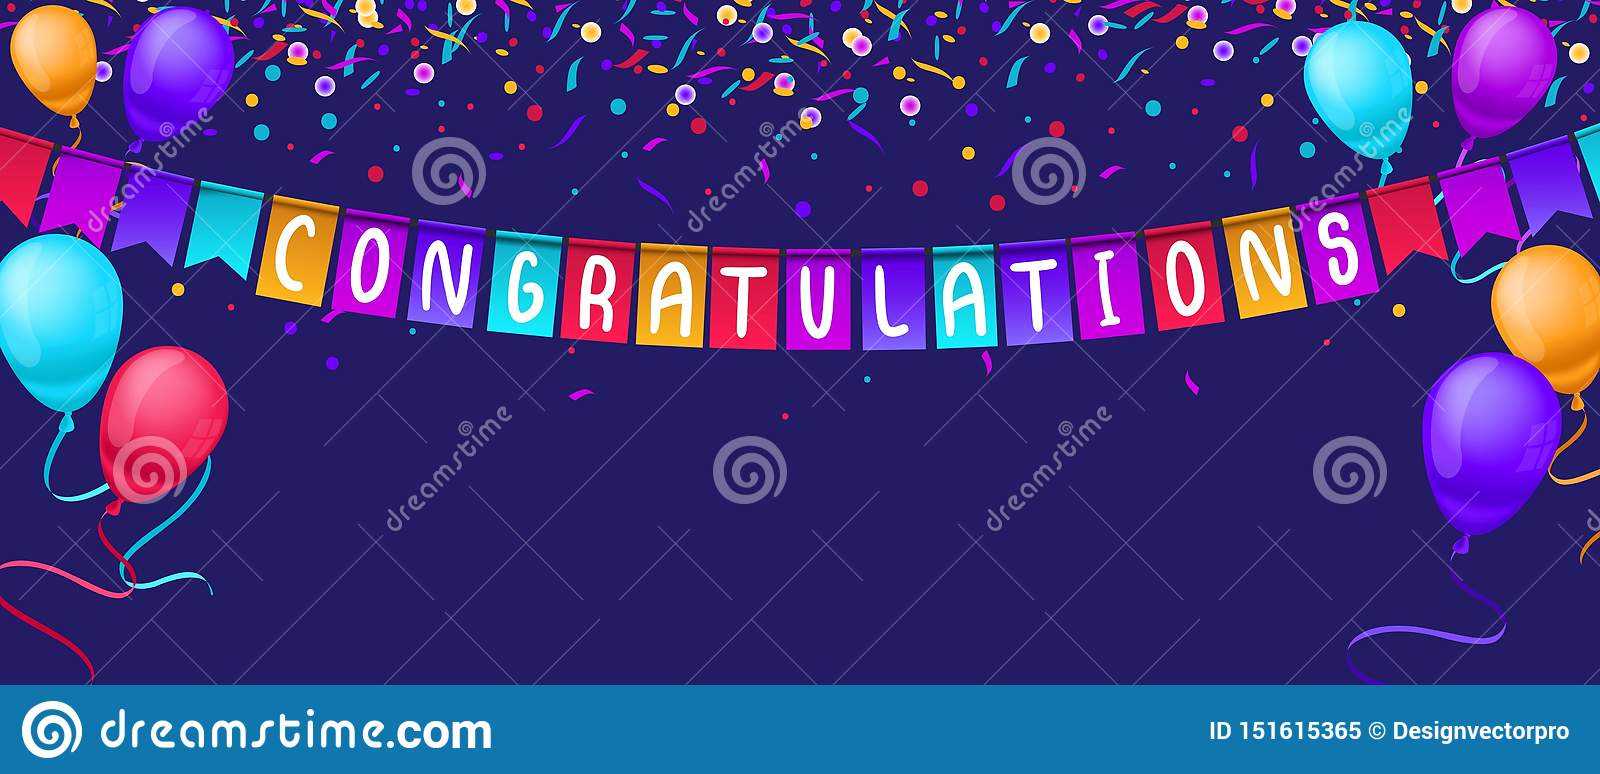 Congratulations Banner Template With Balloons And Confetti Regarding Congratulations Banner Template